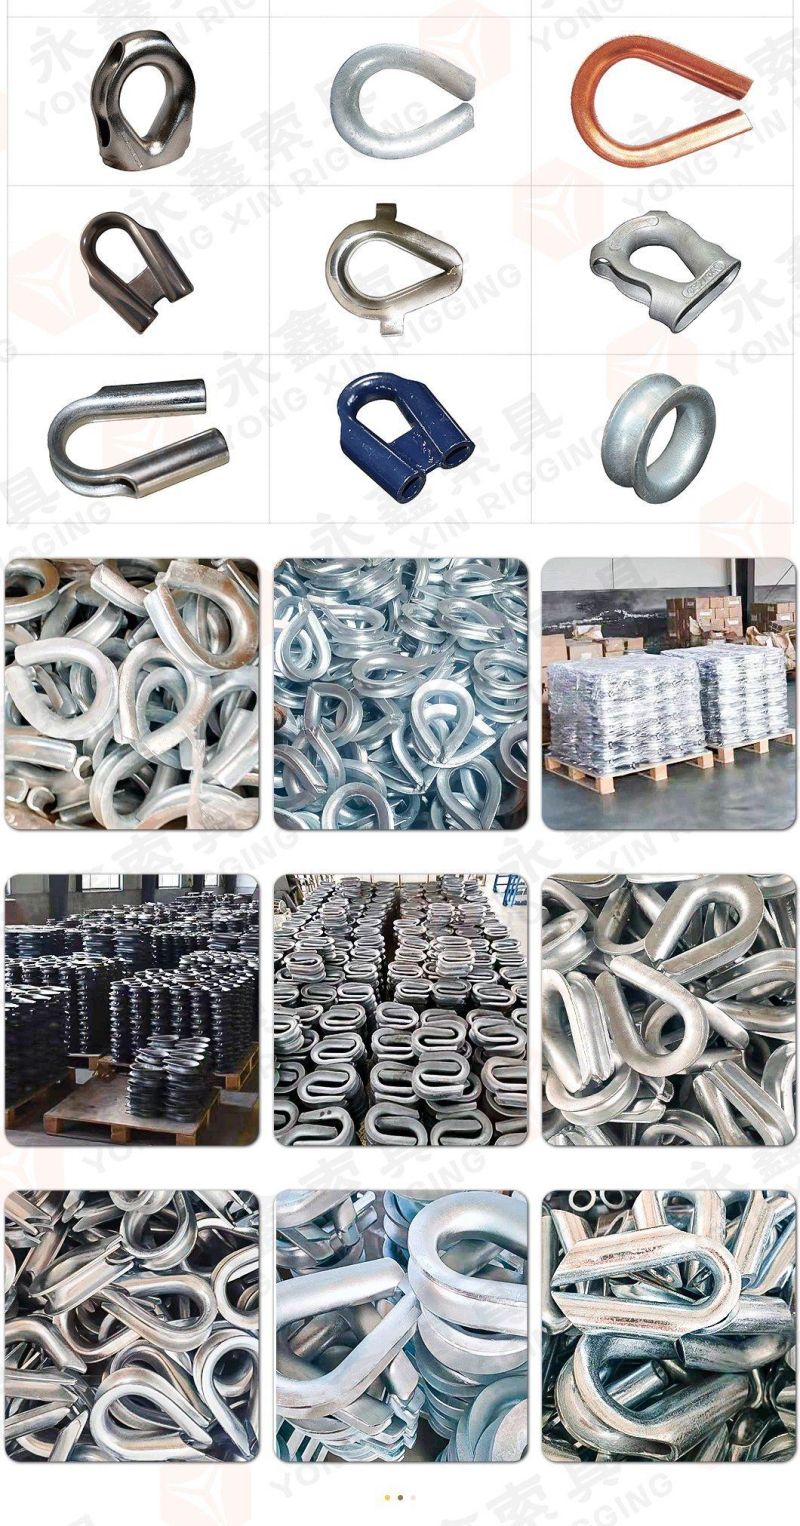 /4, 5/16, 3/8, 7/16, 1/2, 9/16, 5/8, 3/4, 7/8, 1, 1-1/8, 1-1/4, 1-3/8 ′′ Wire Rope Thimbles G 414